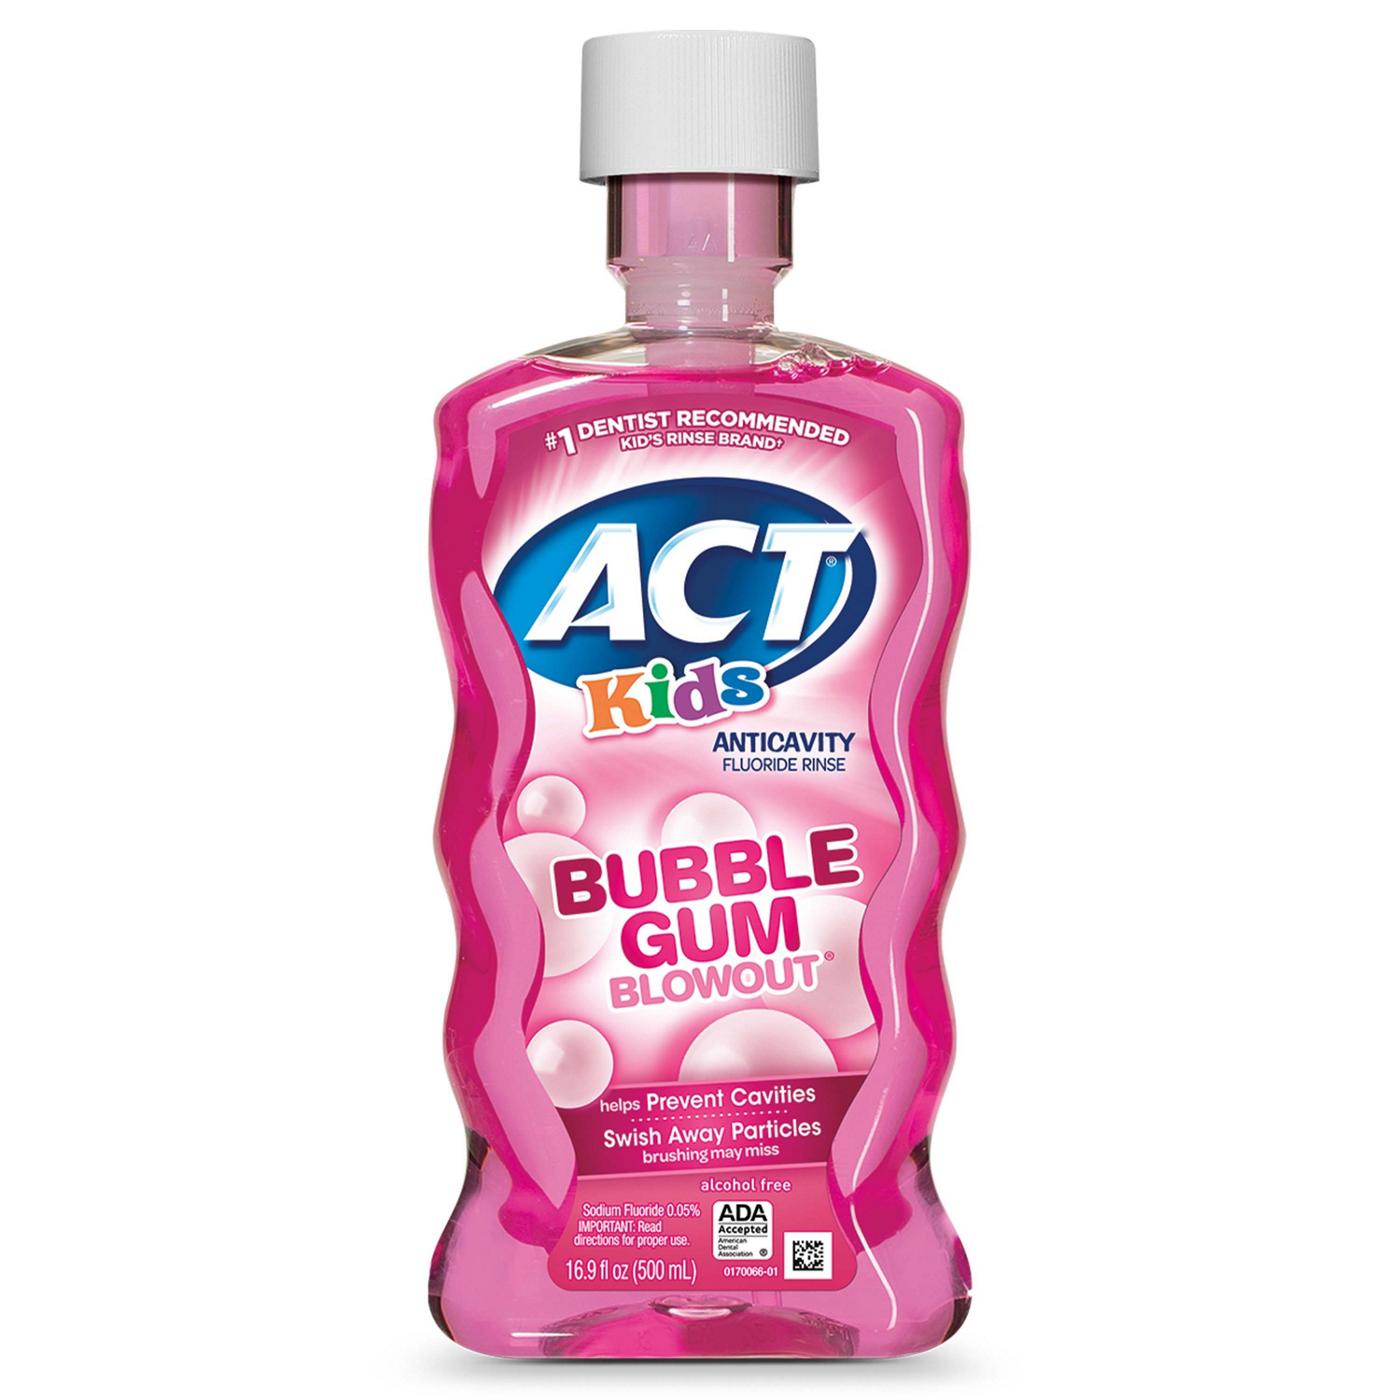 ACT Kids Anticavity Fluoride Rinse - Bubble Gum Blowout; image 1 of 3